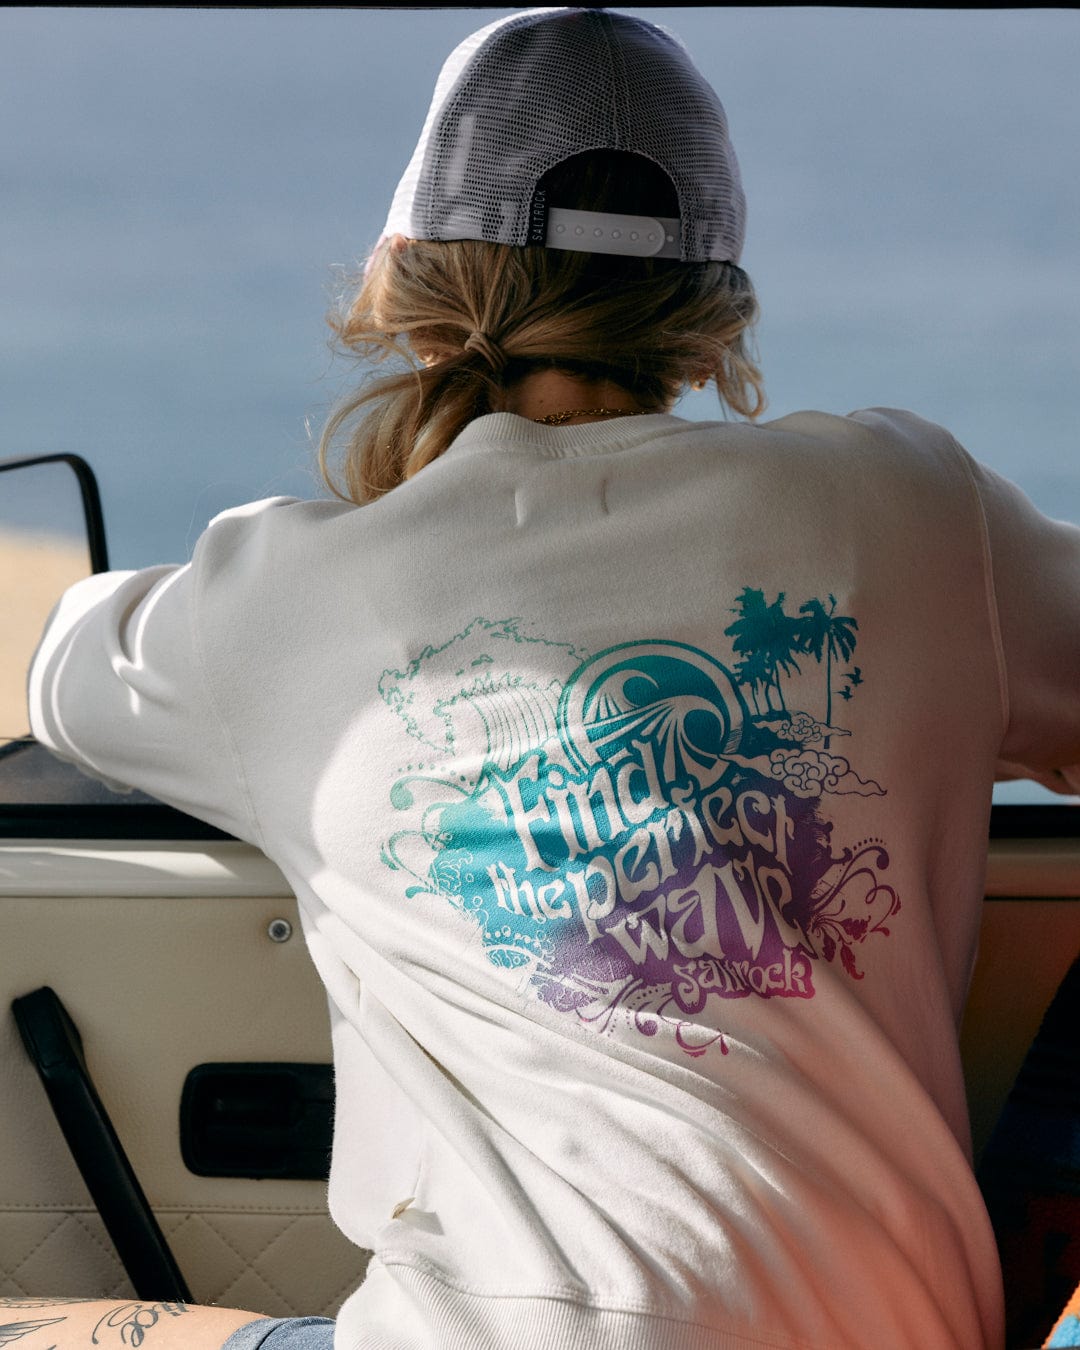 A woman sitting in a car looking at the Saltrock Find The Perfect Wave - Womens Sweat - White.